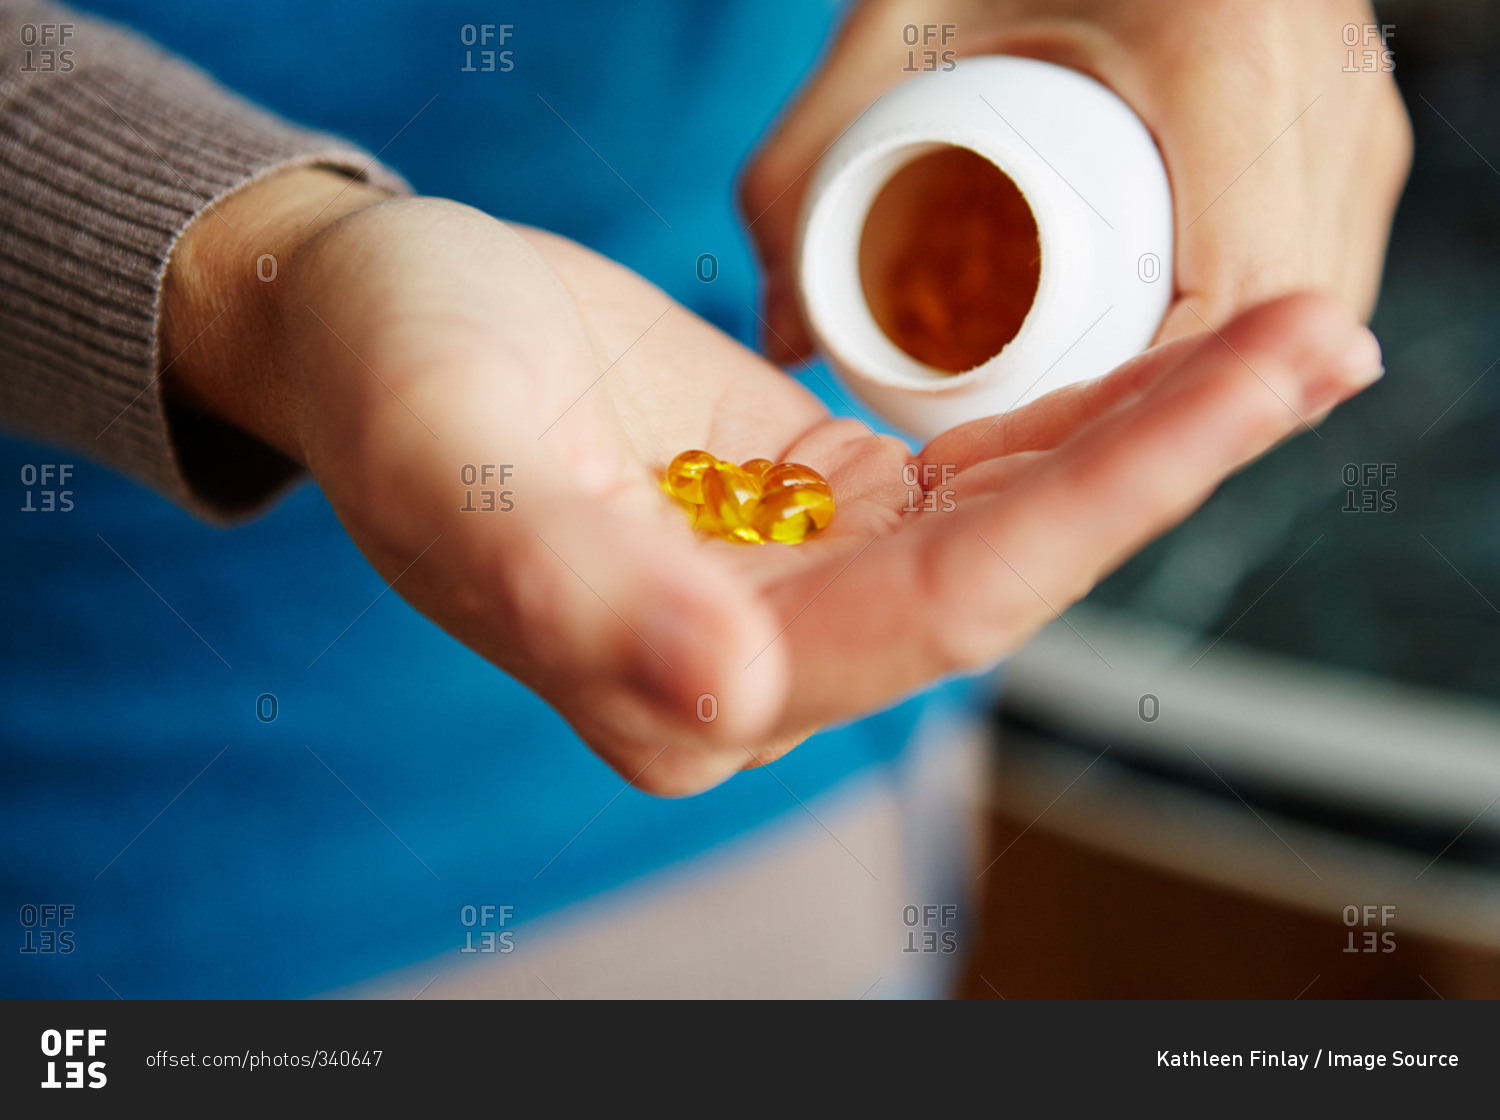 Young woman taking medication from bottle, close-up